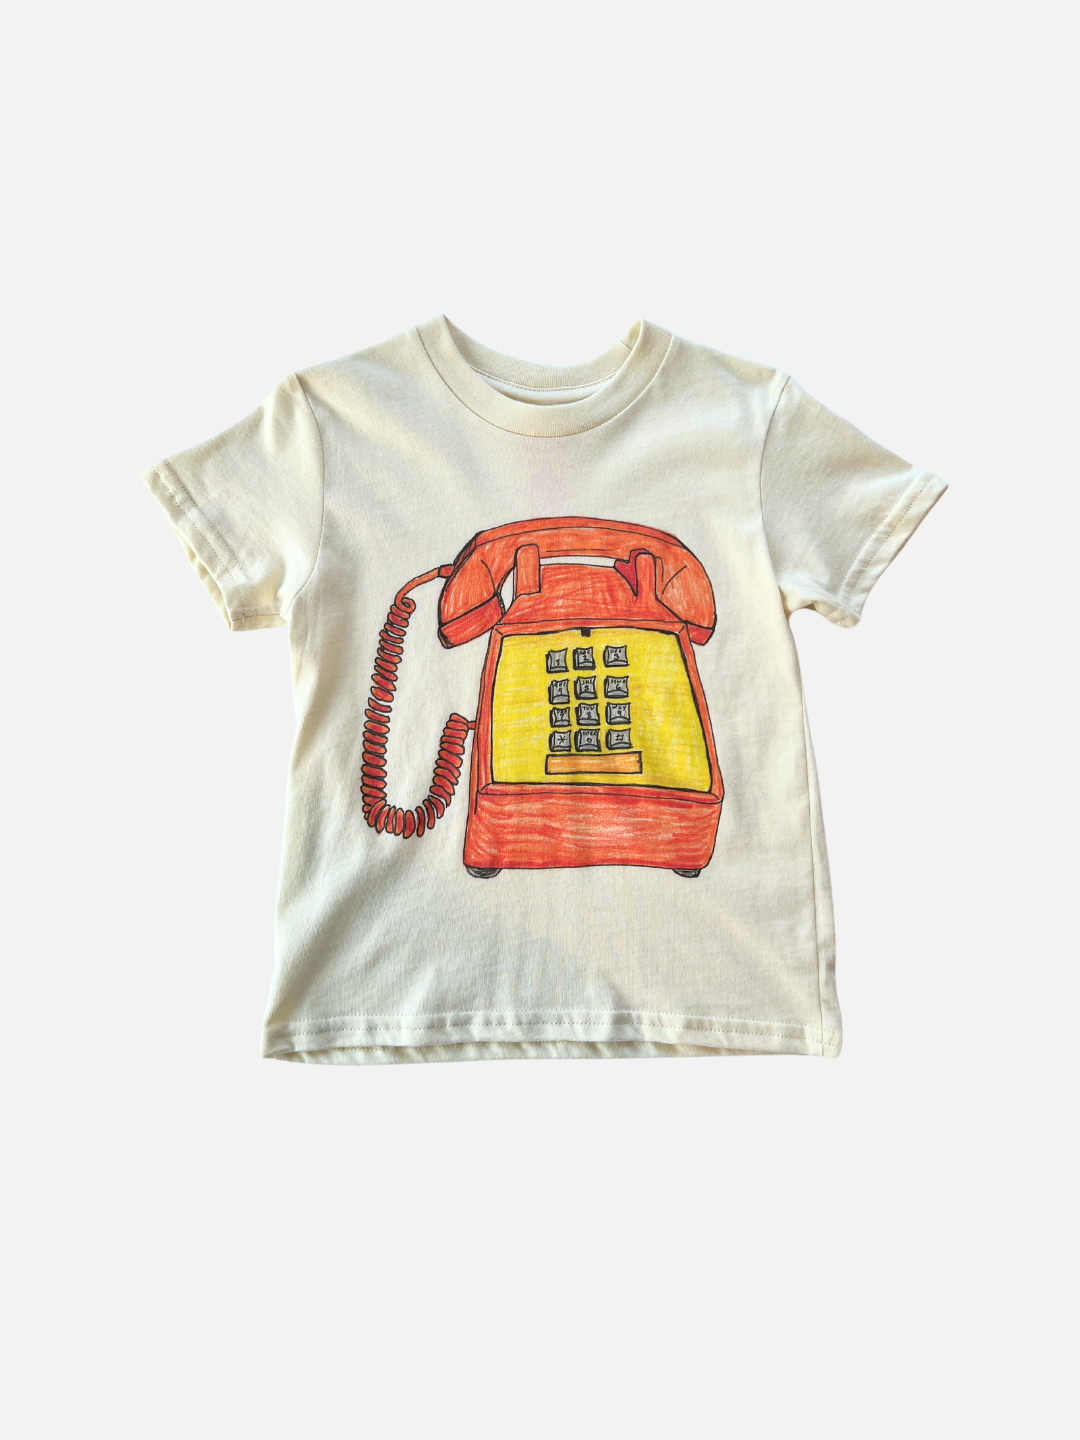 Off-white kid's tee with an orange and yellow button phone graphic